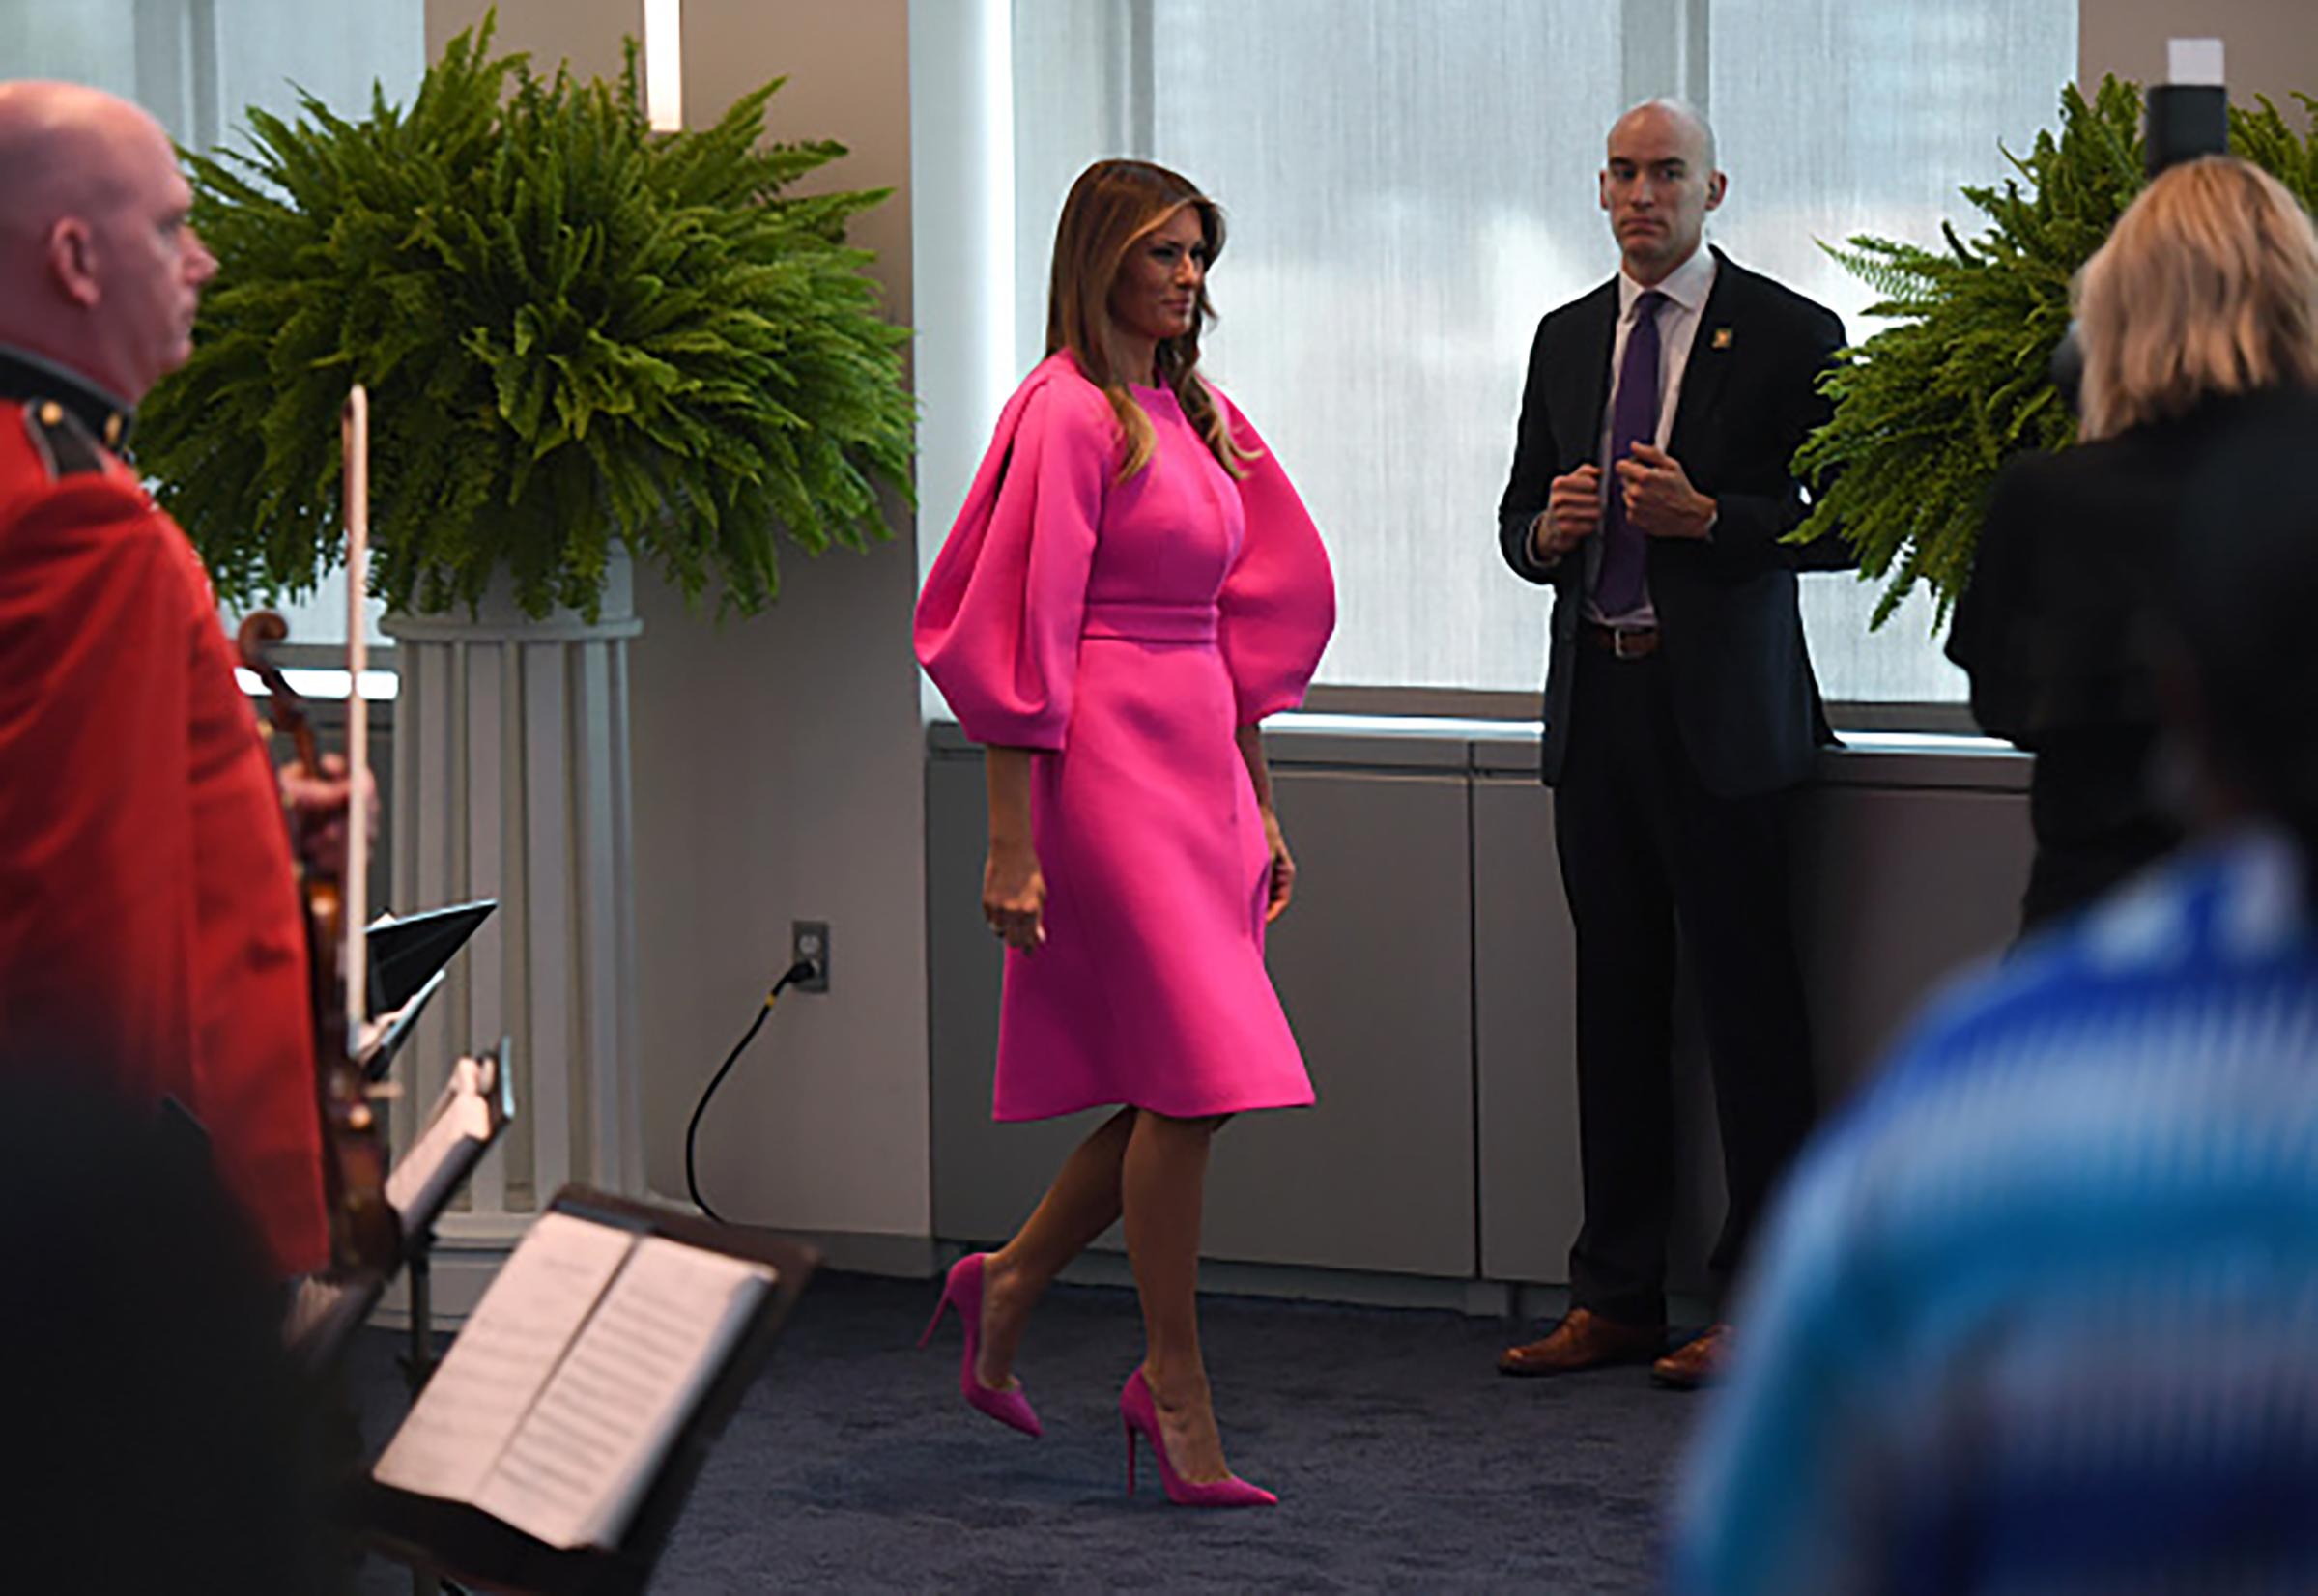 First Lady Melania Trump wearing a fuchsia Delpozo coatdress, arrives to address other first spouses of world leaders at a United Nations luncheon on September 20, 2017, at the United States Mission in New York.